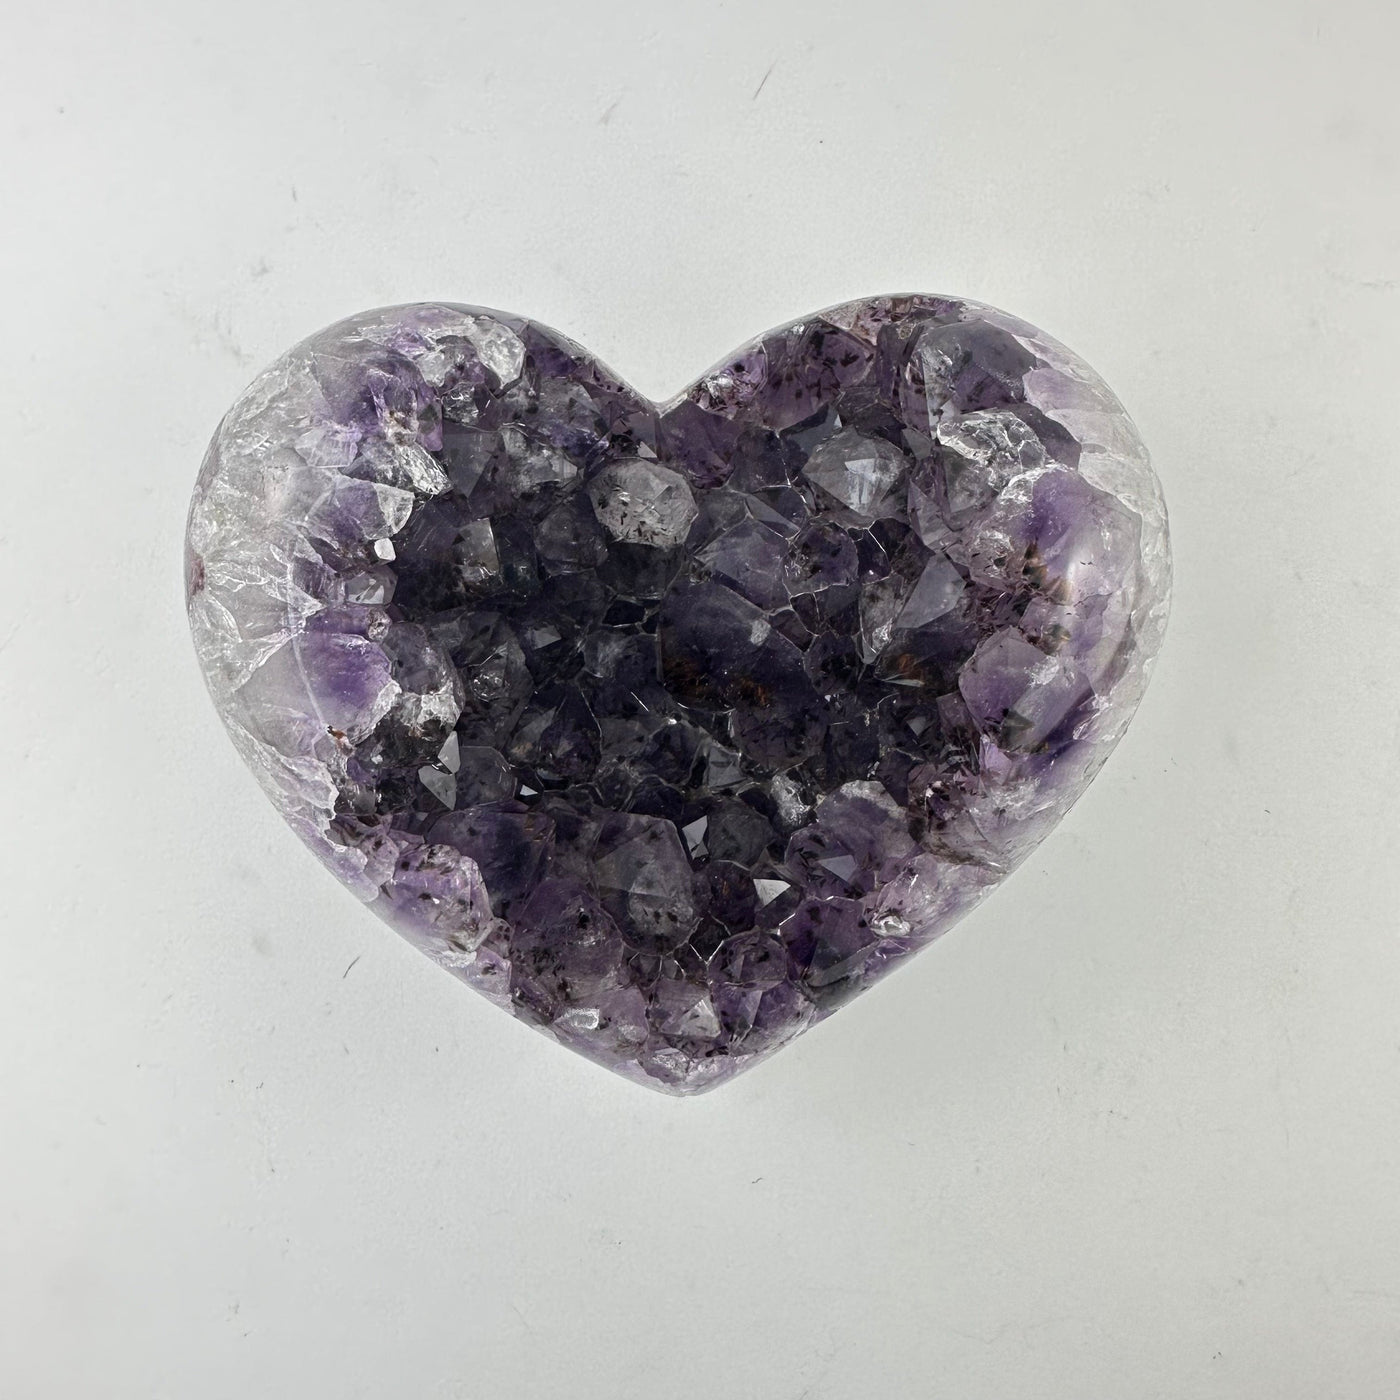 Amethyst Crystal Cluster Heart on table